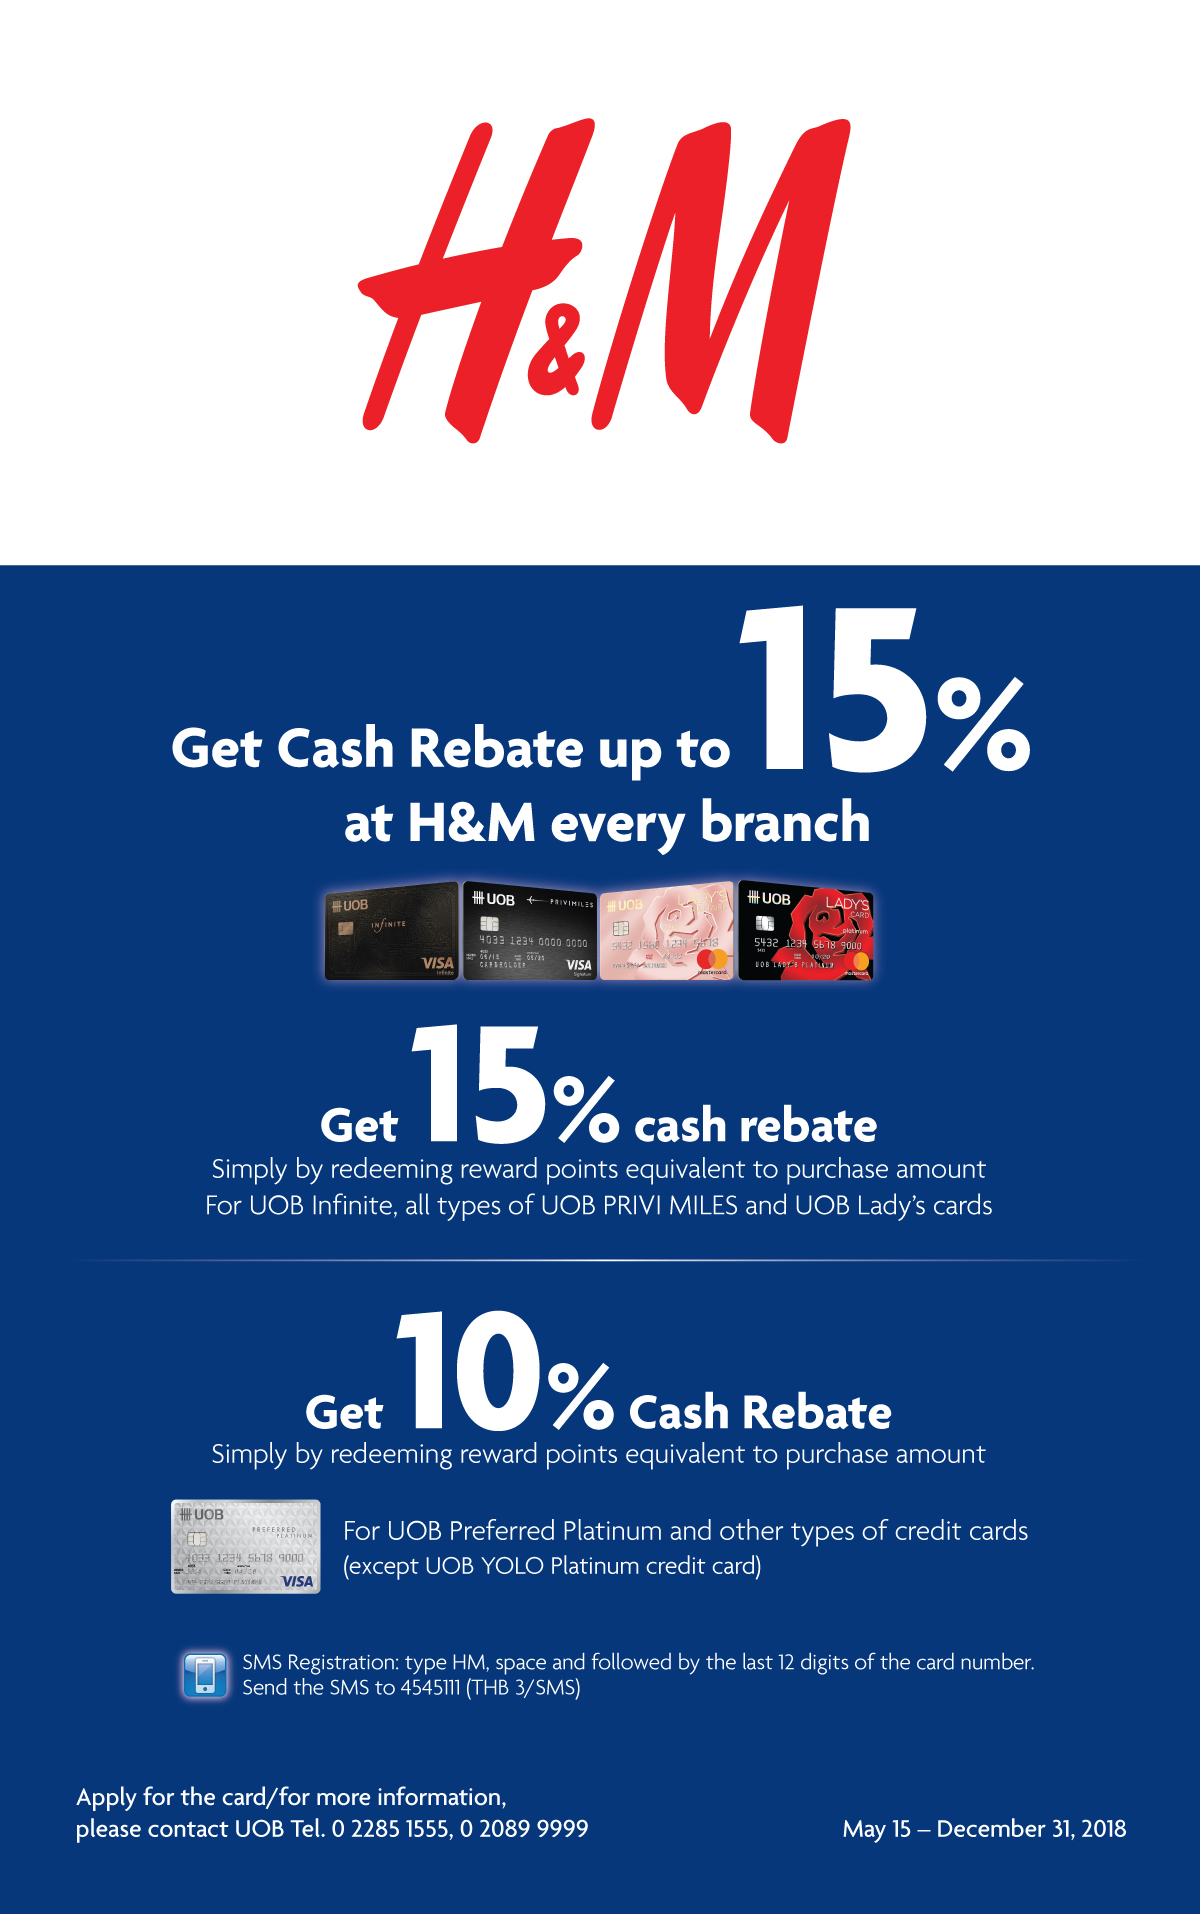 Get Cash Rebate up to 15 at H&M every branch